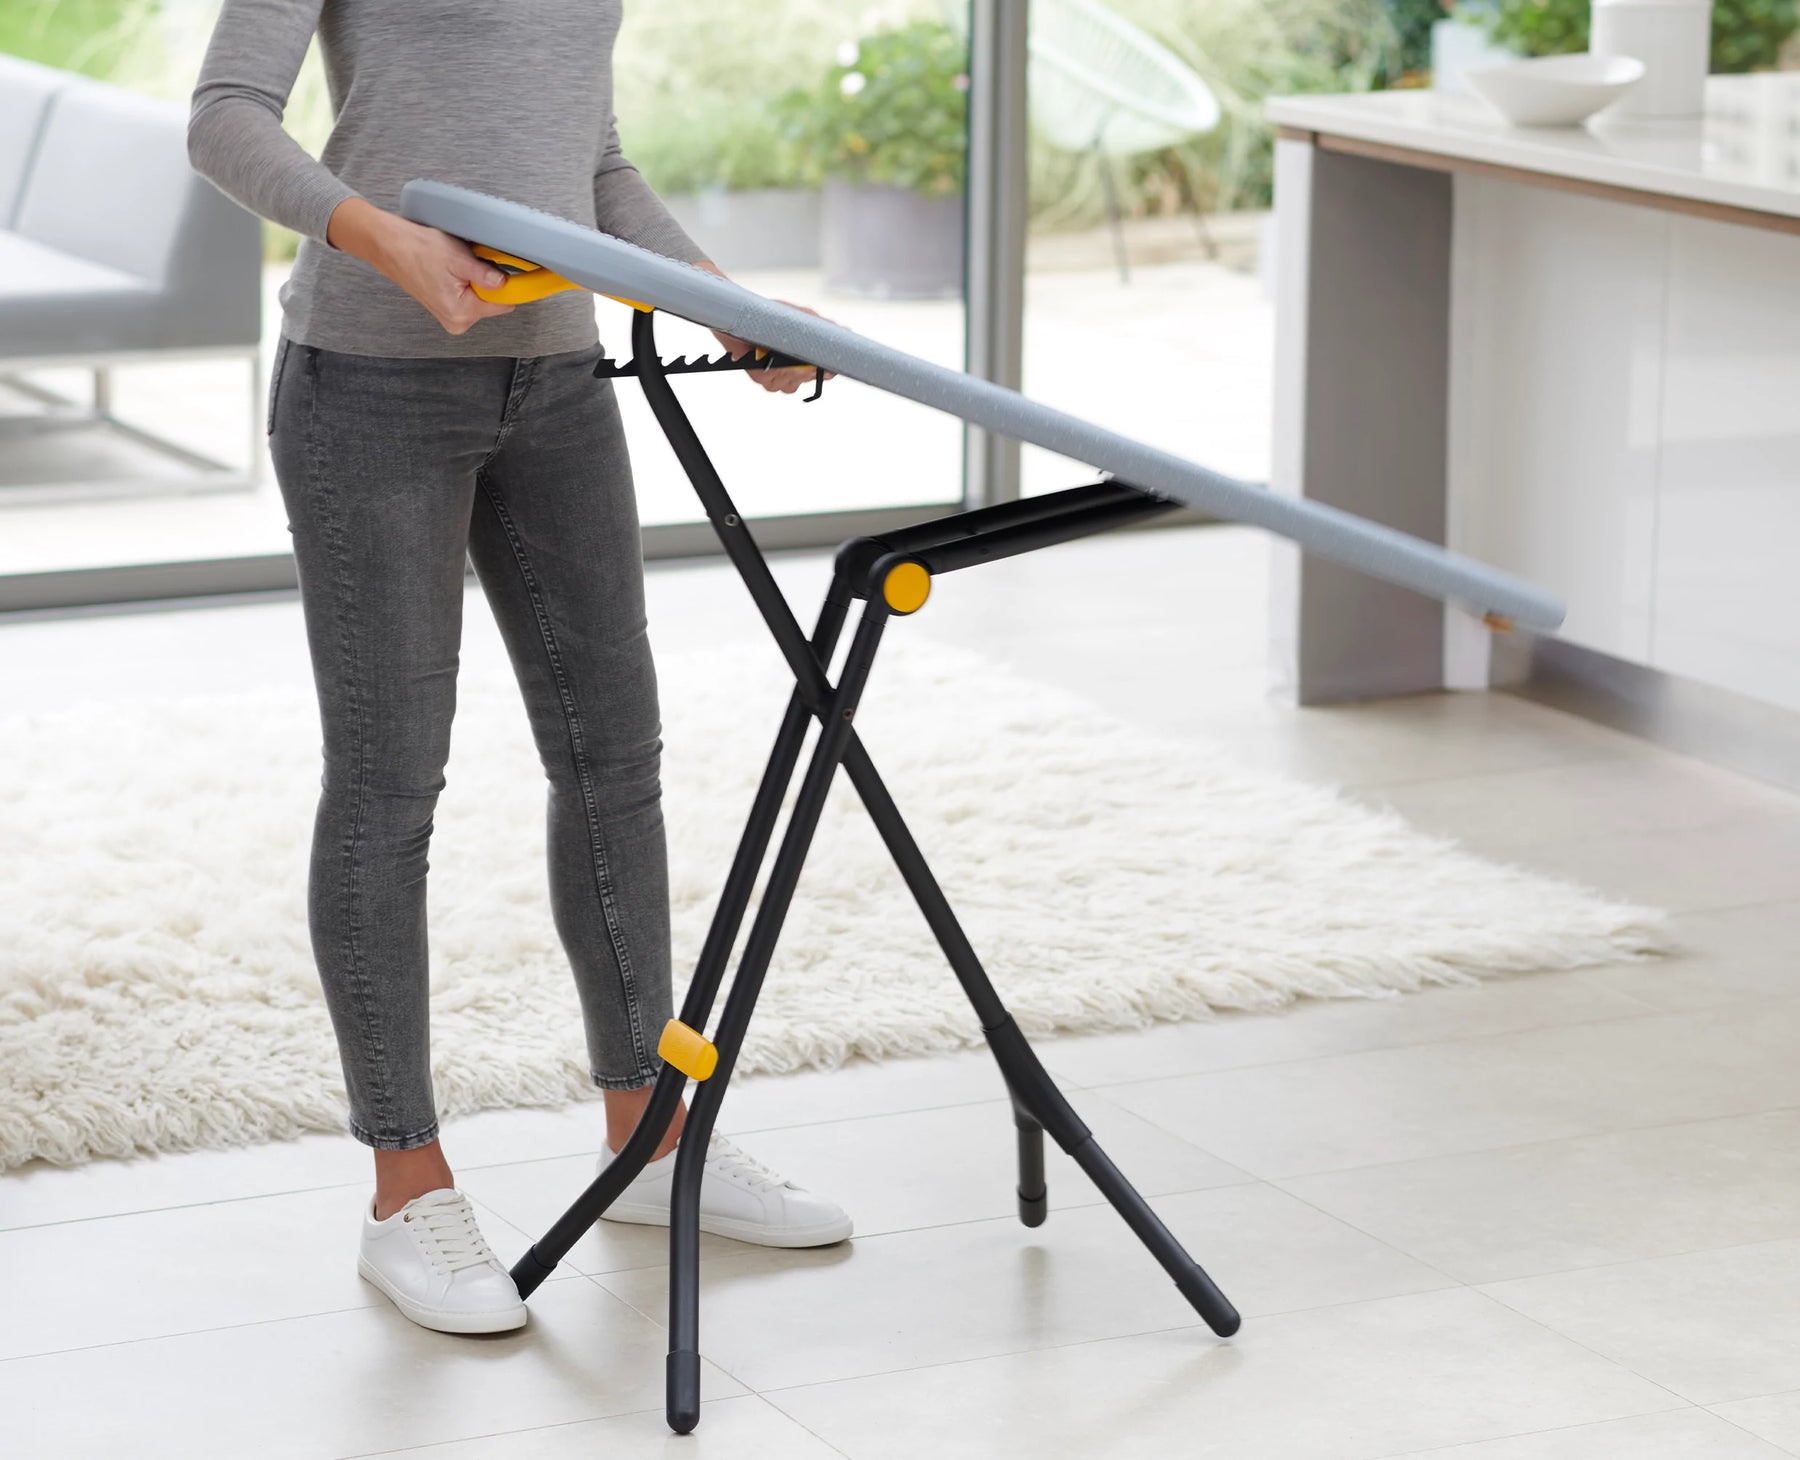 Glide Easy-store Ironing Board - Image 6